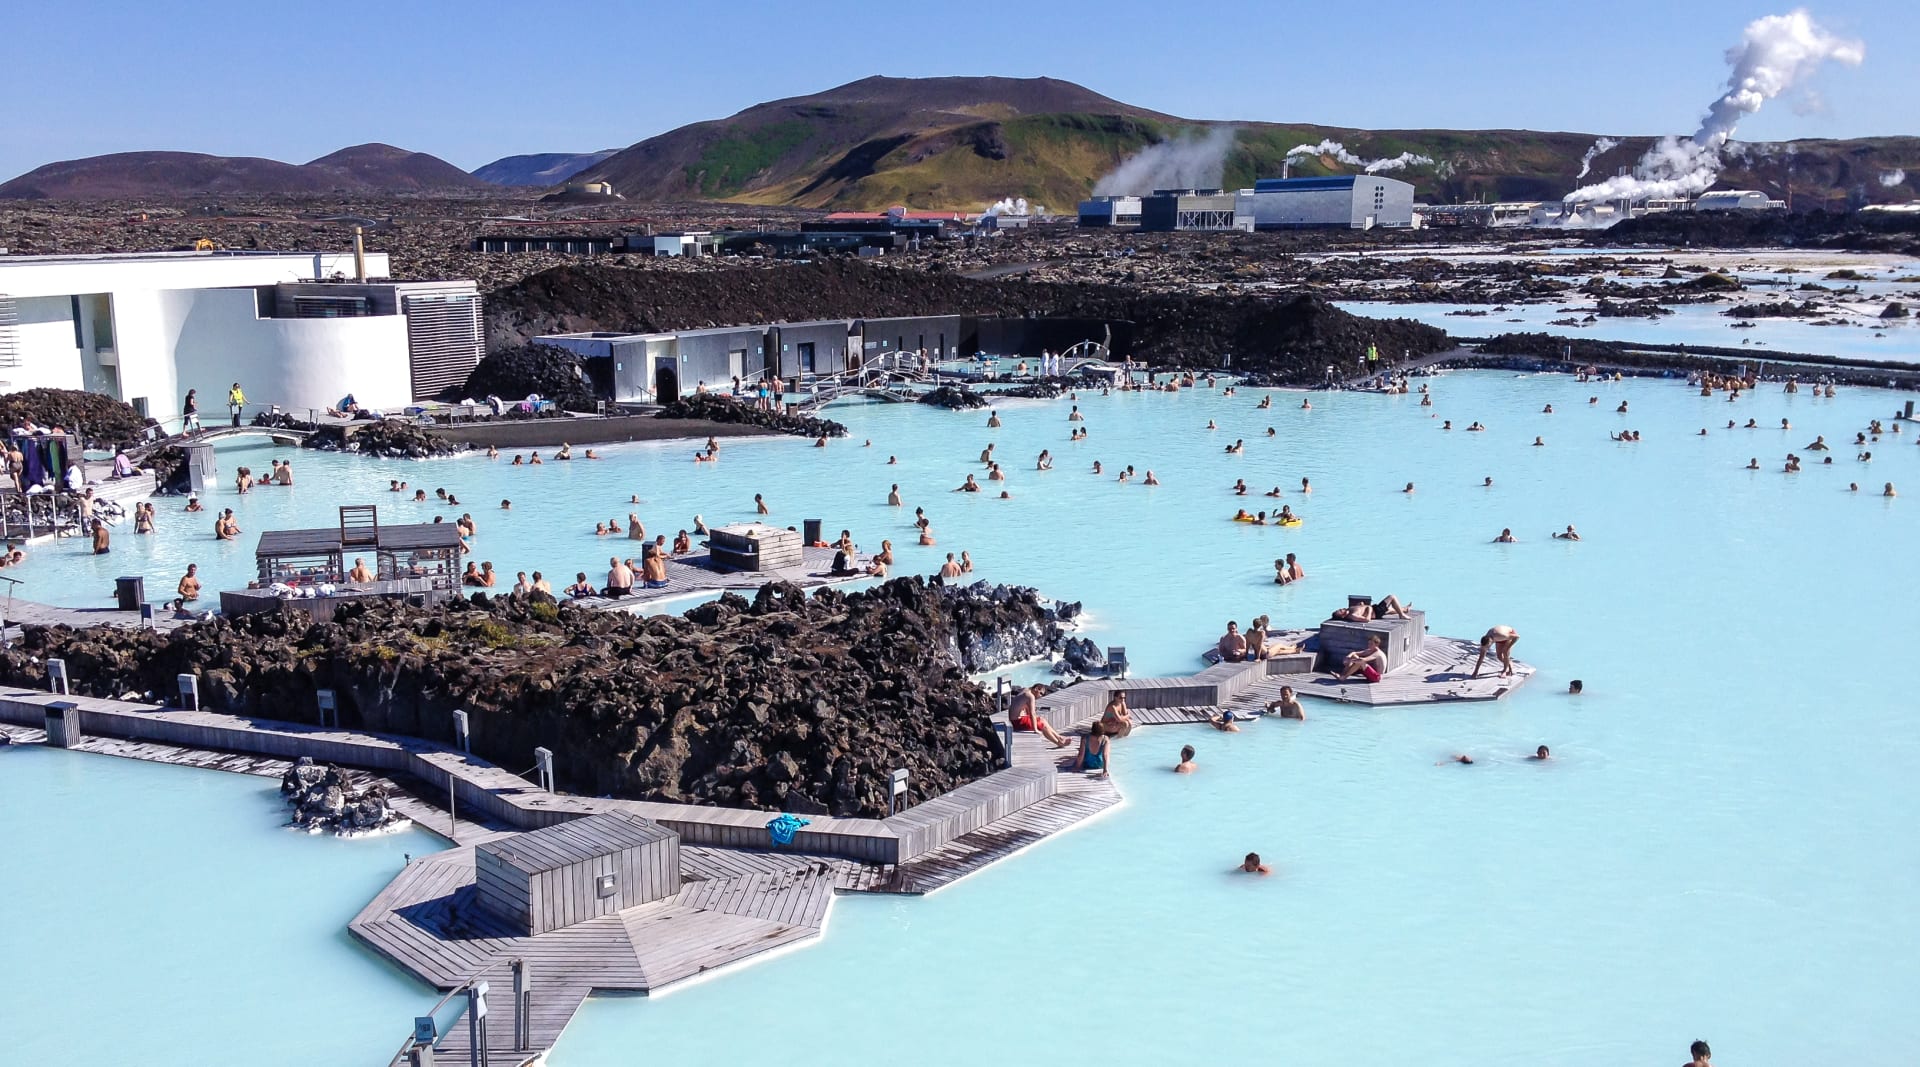 View of the beautiful blue waters of the Blue Lagoon, one of Iceland's most popular attractions